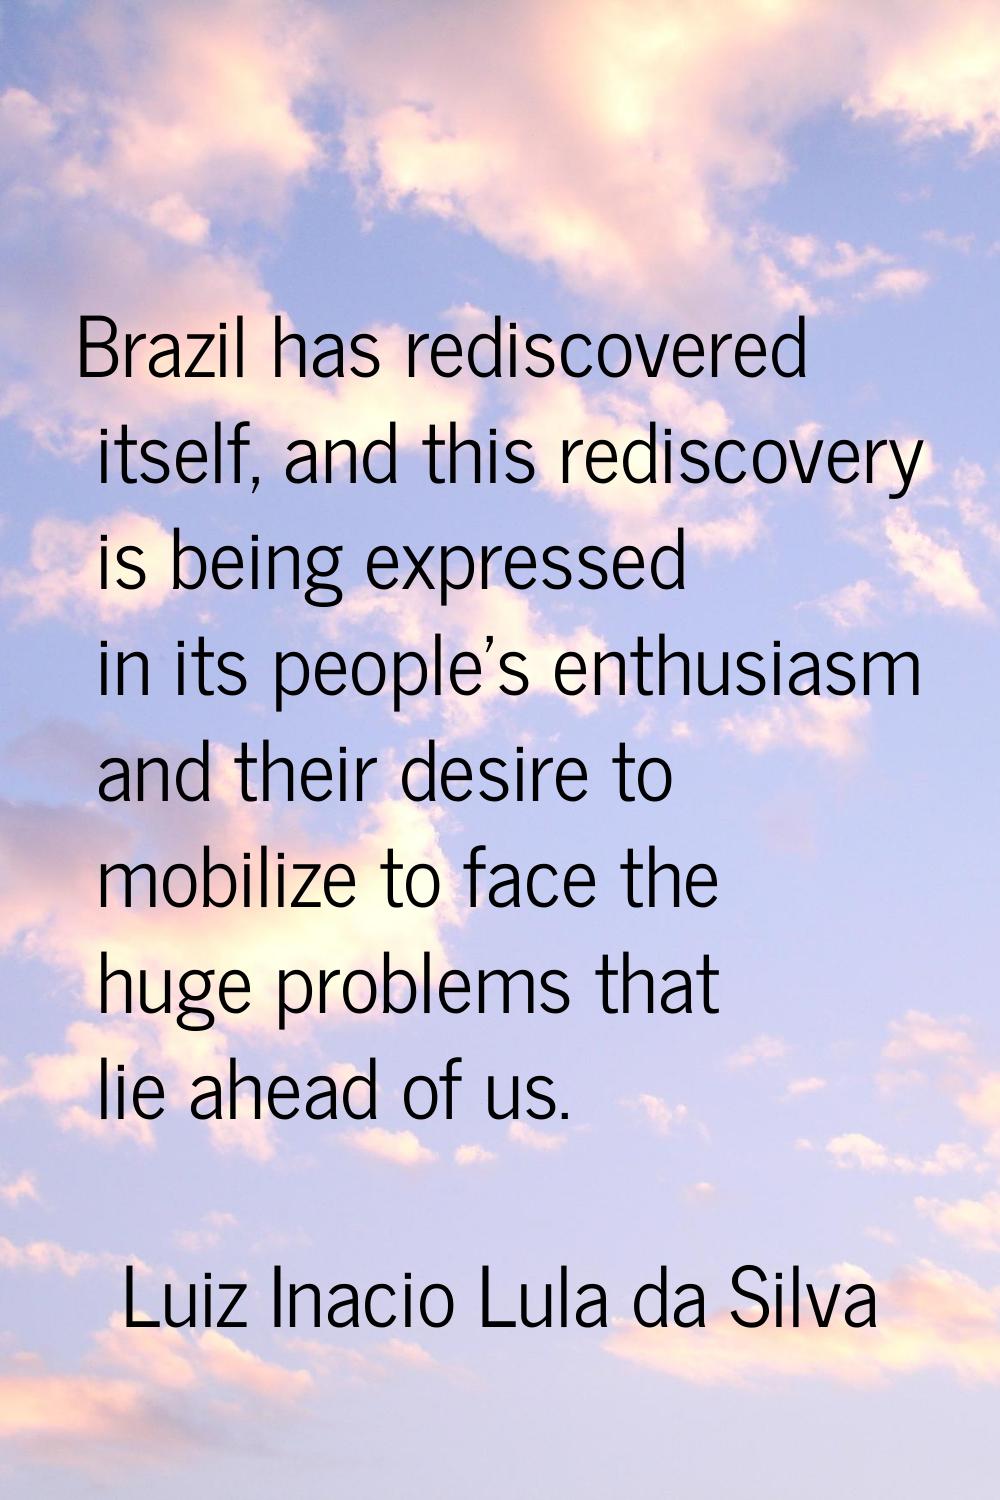 Brazil has rediscovered itself, and this rediscovery is being expressed in its people's enthusiasm 